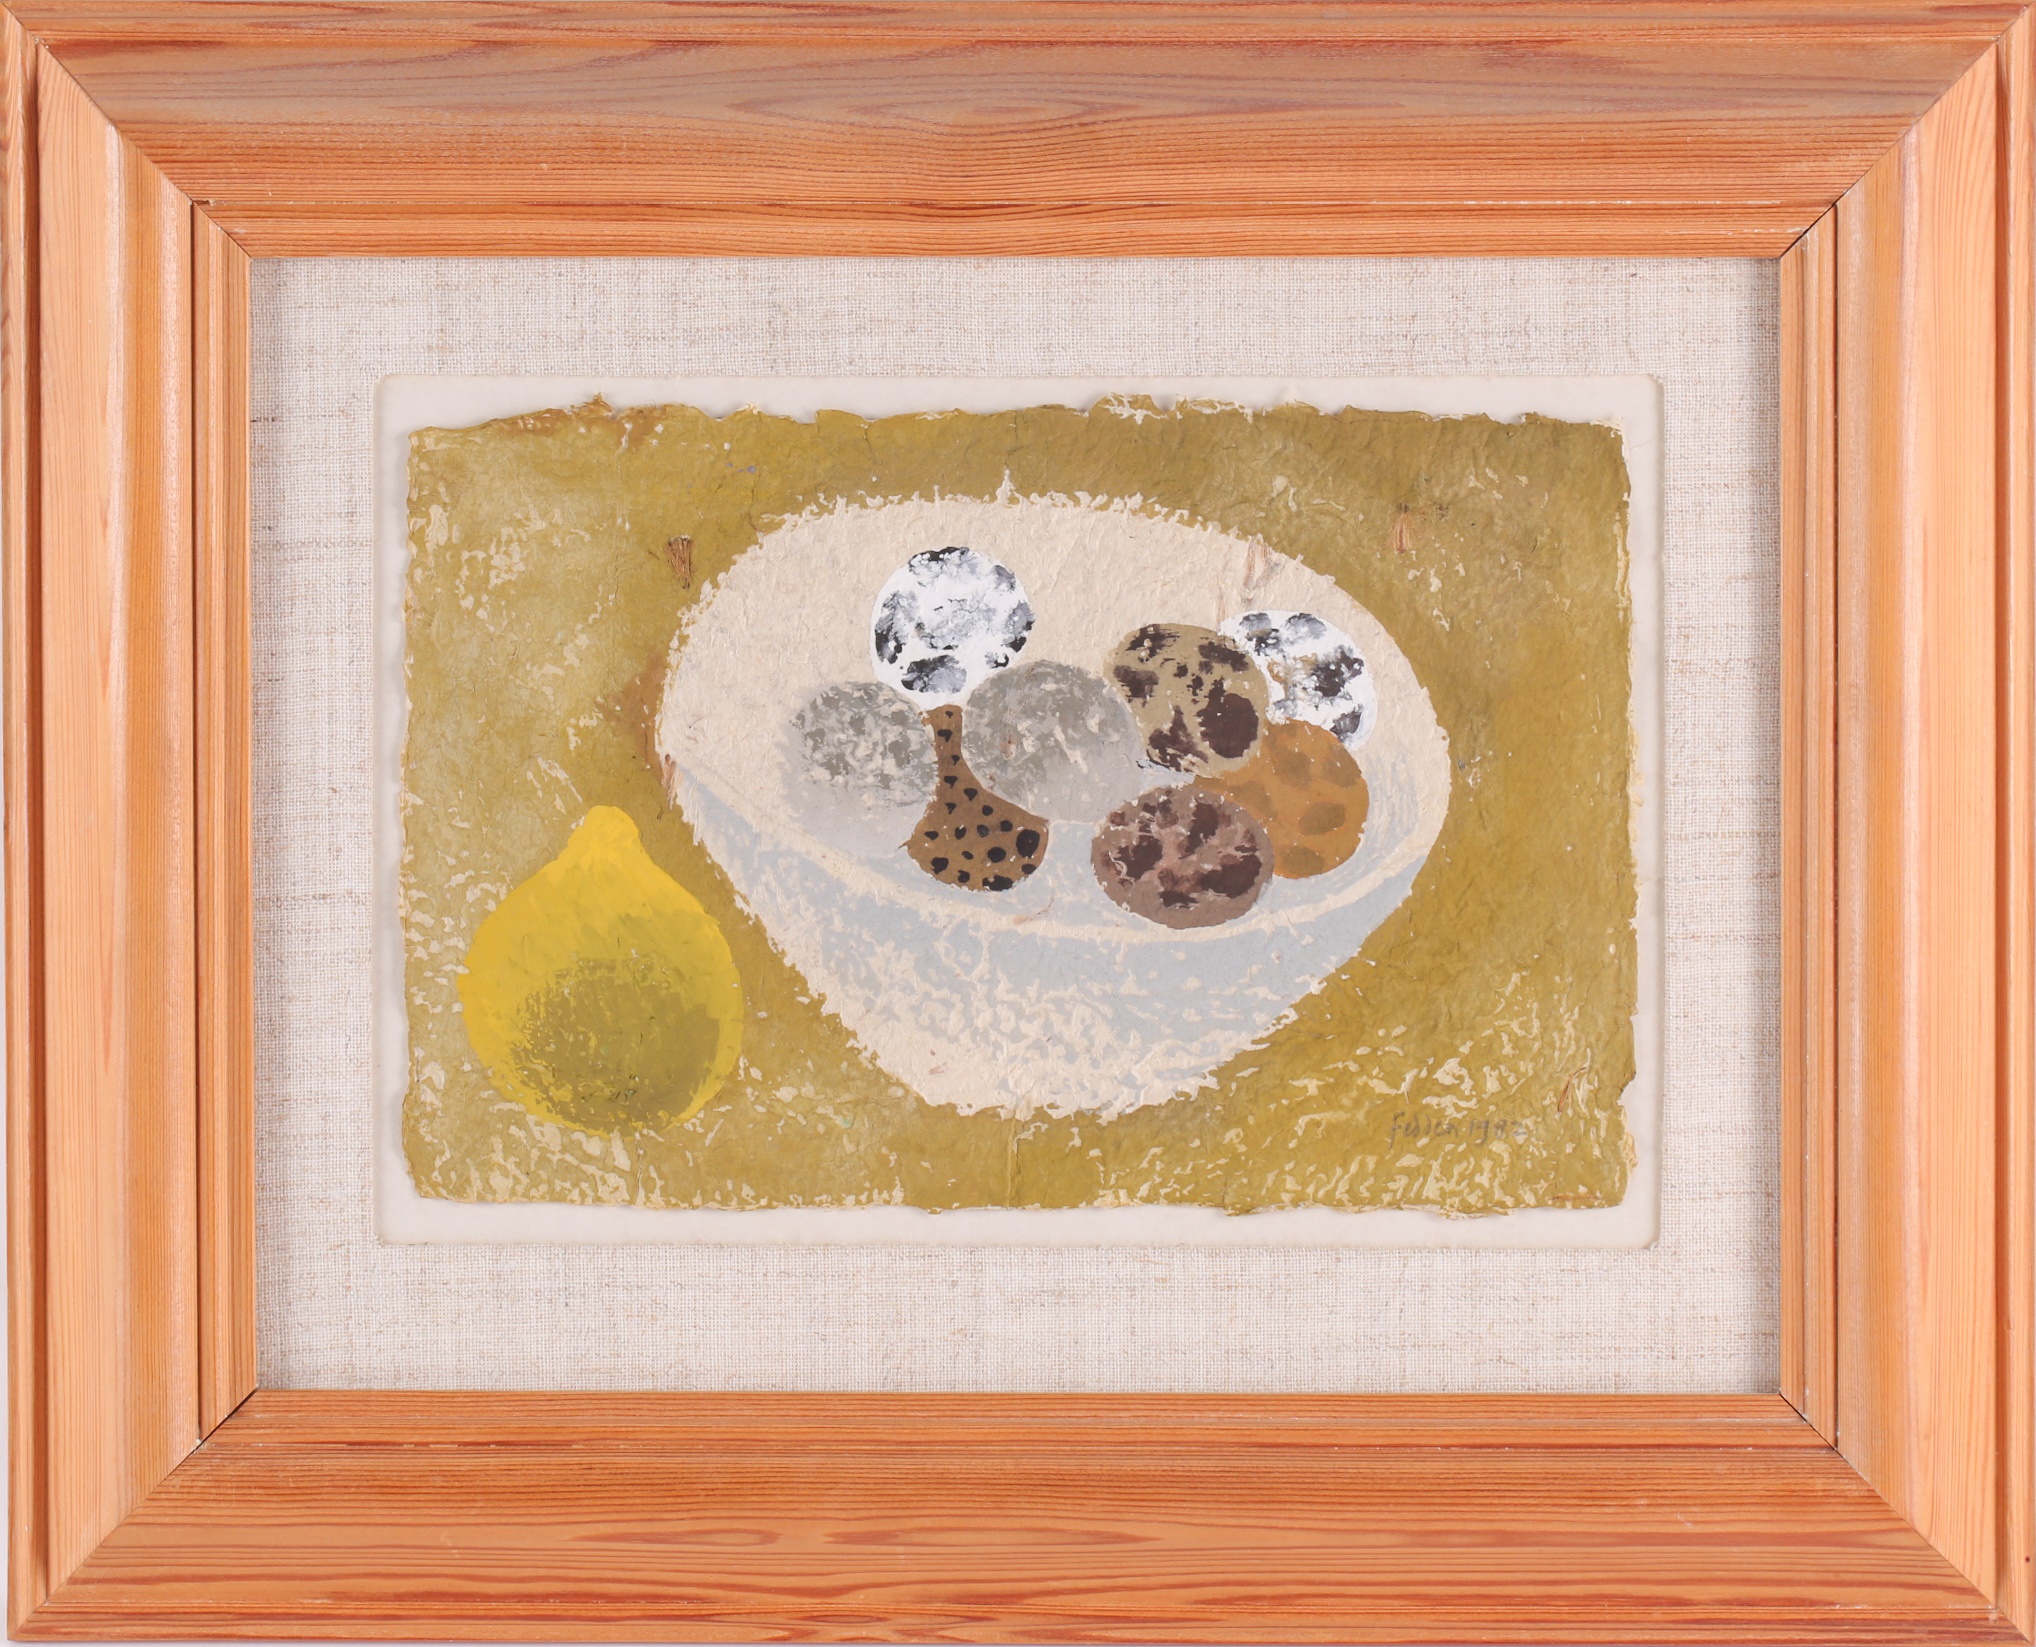 Mary Fedden Eggs in bowl and lemon